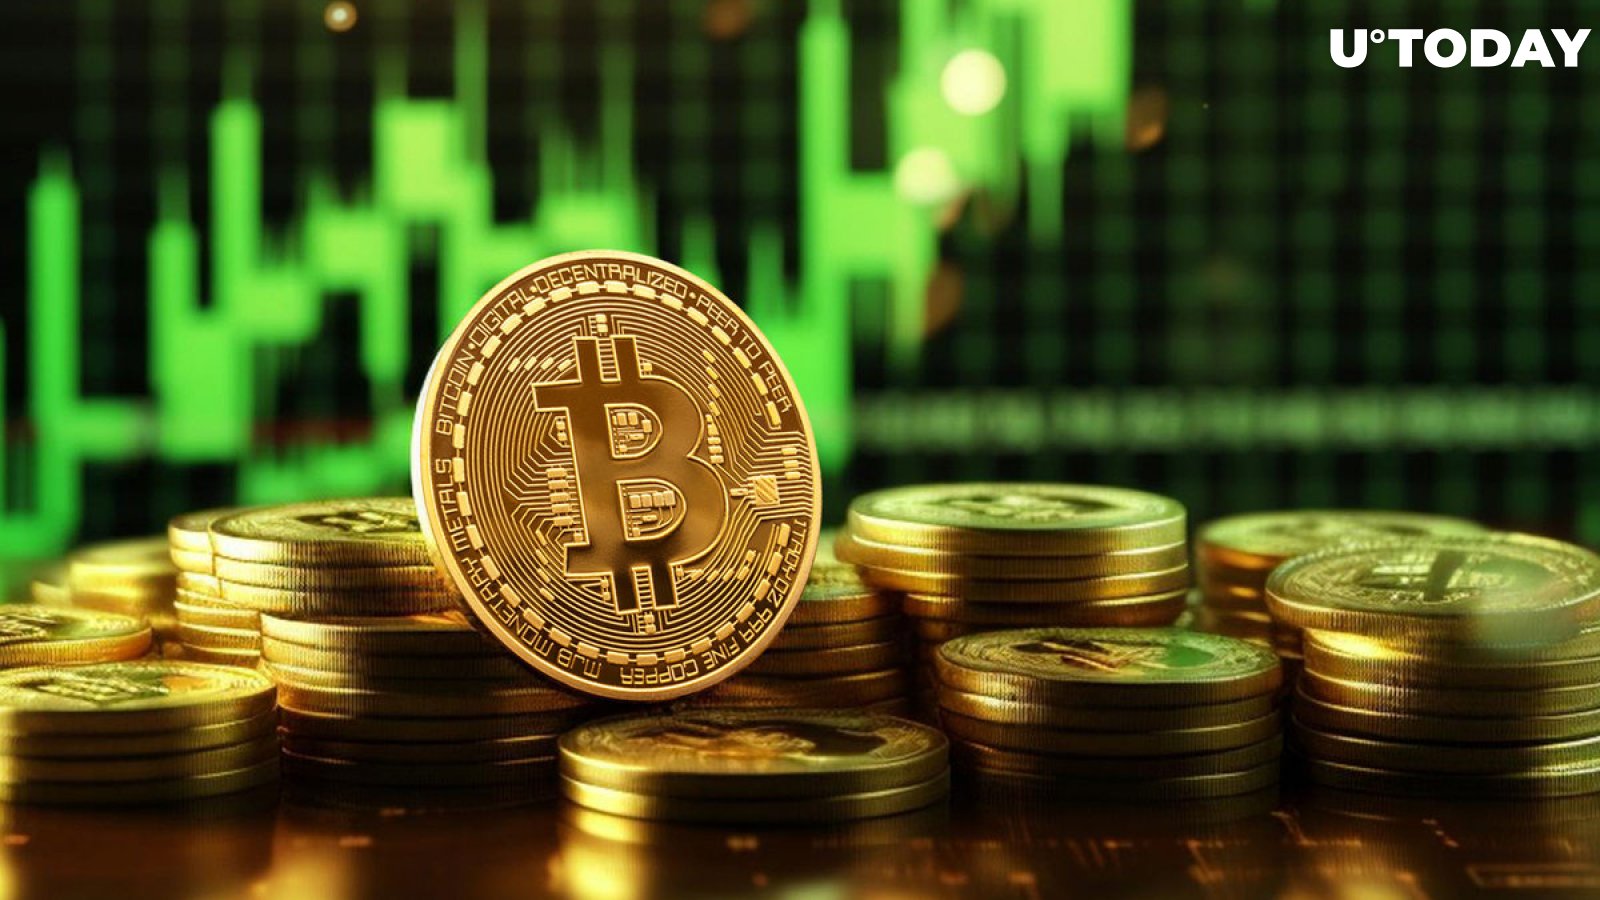 Bitcoin "Heading Higher" After 9,700% Price Increase, Bitwise CIO Predicts